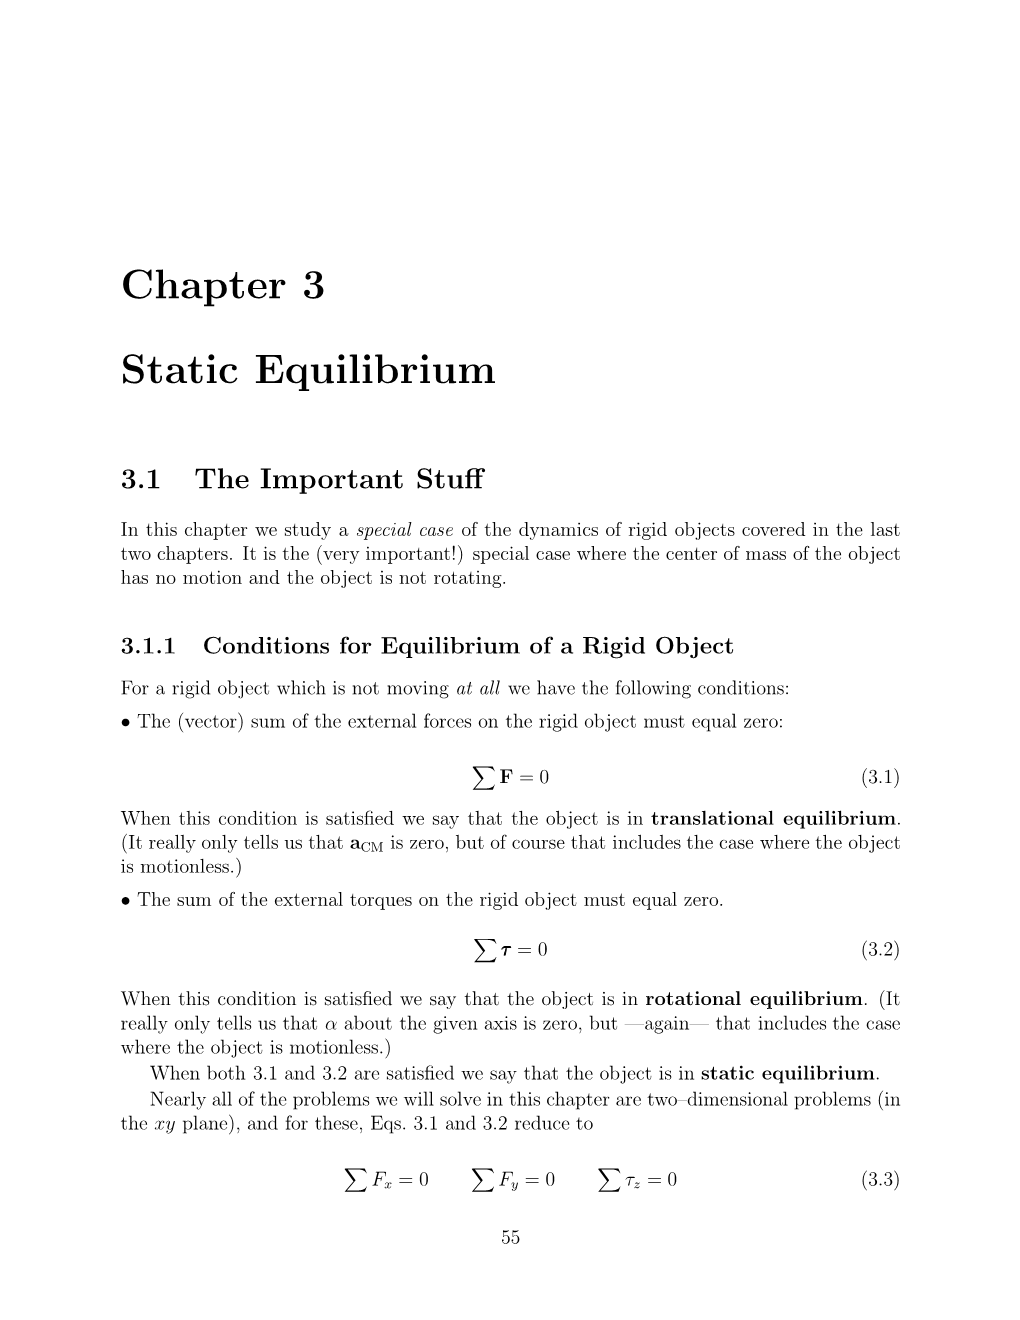 Chapter 3 Static Equilibrium